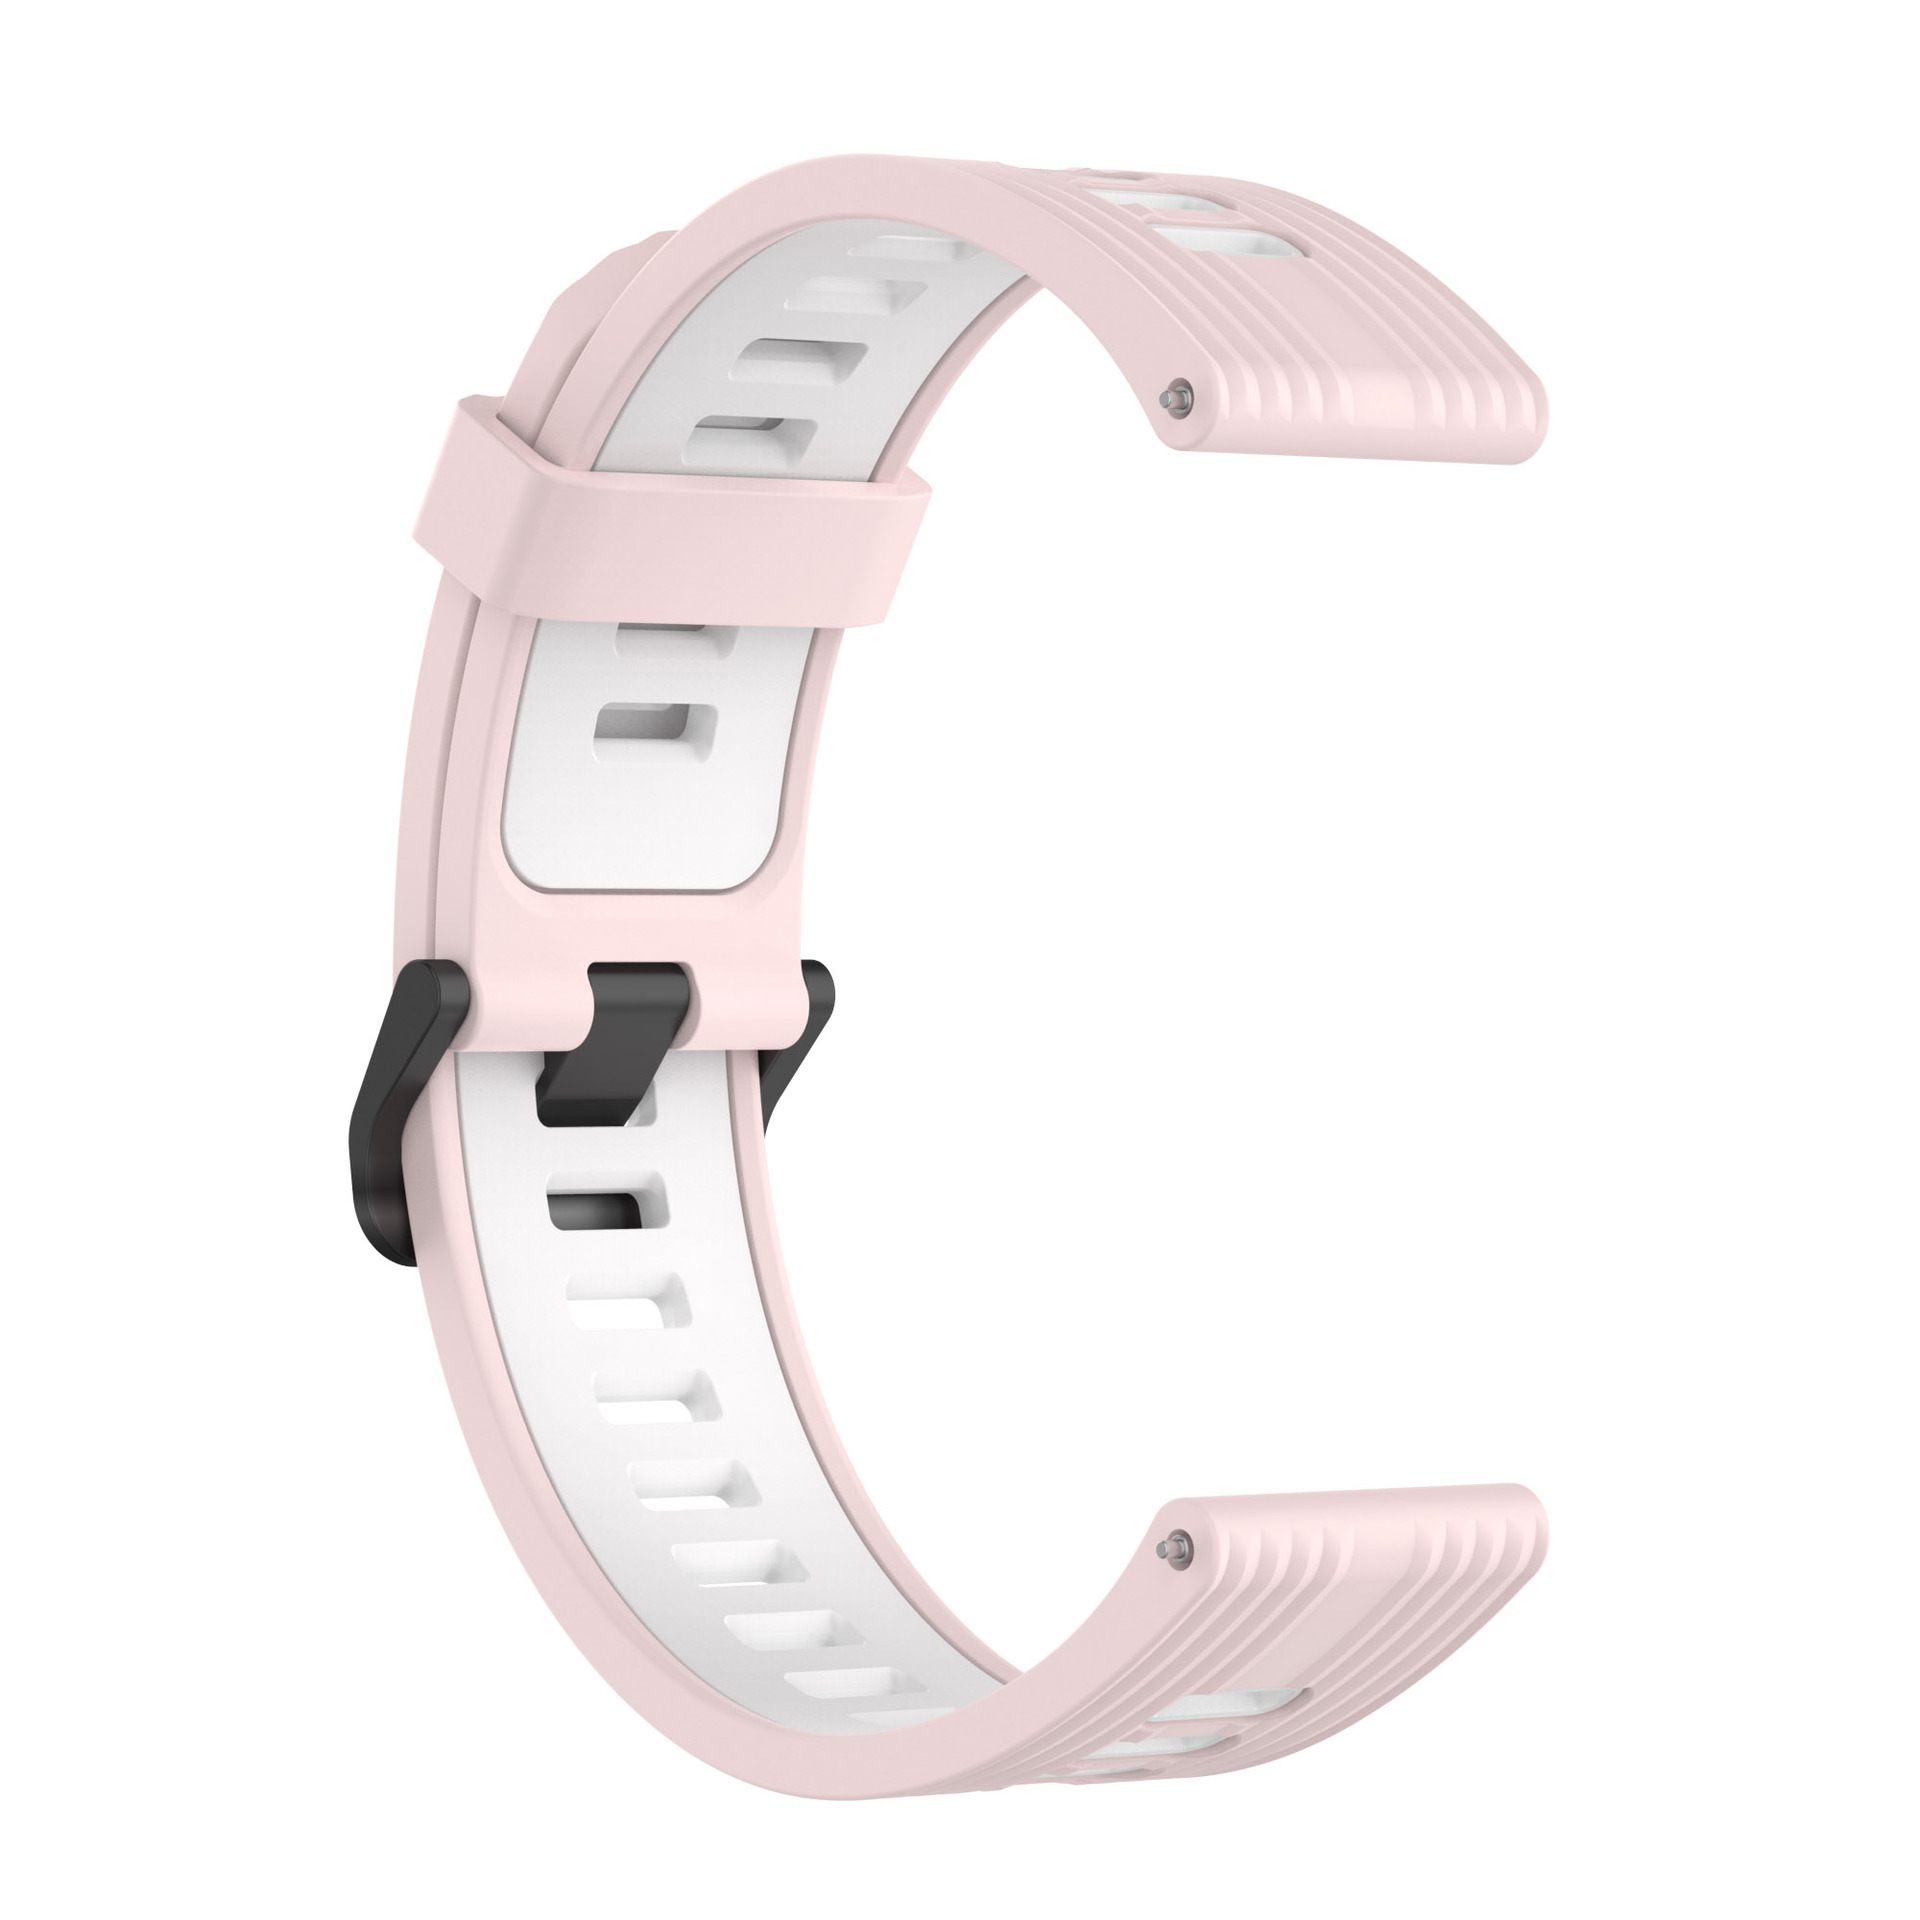 Bakeey-2022mm-Width-Comfortable-Breathable-Sweat-proof-Soft-Silicone-Watch-Band-Strap-Replacement-fo-1926926-14